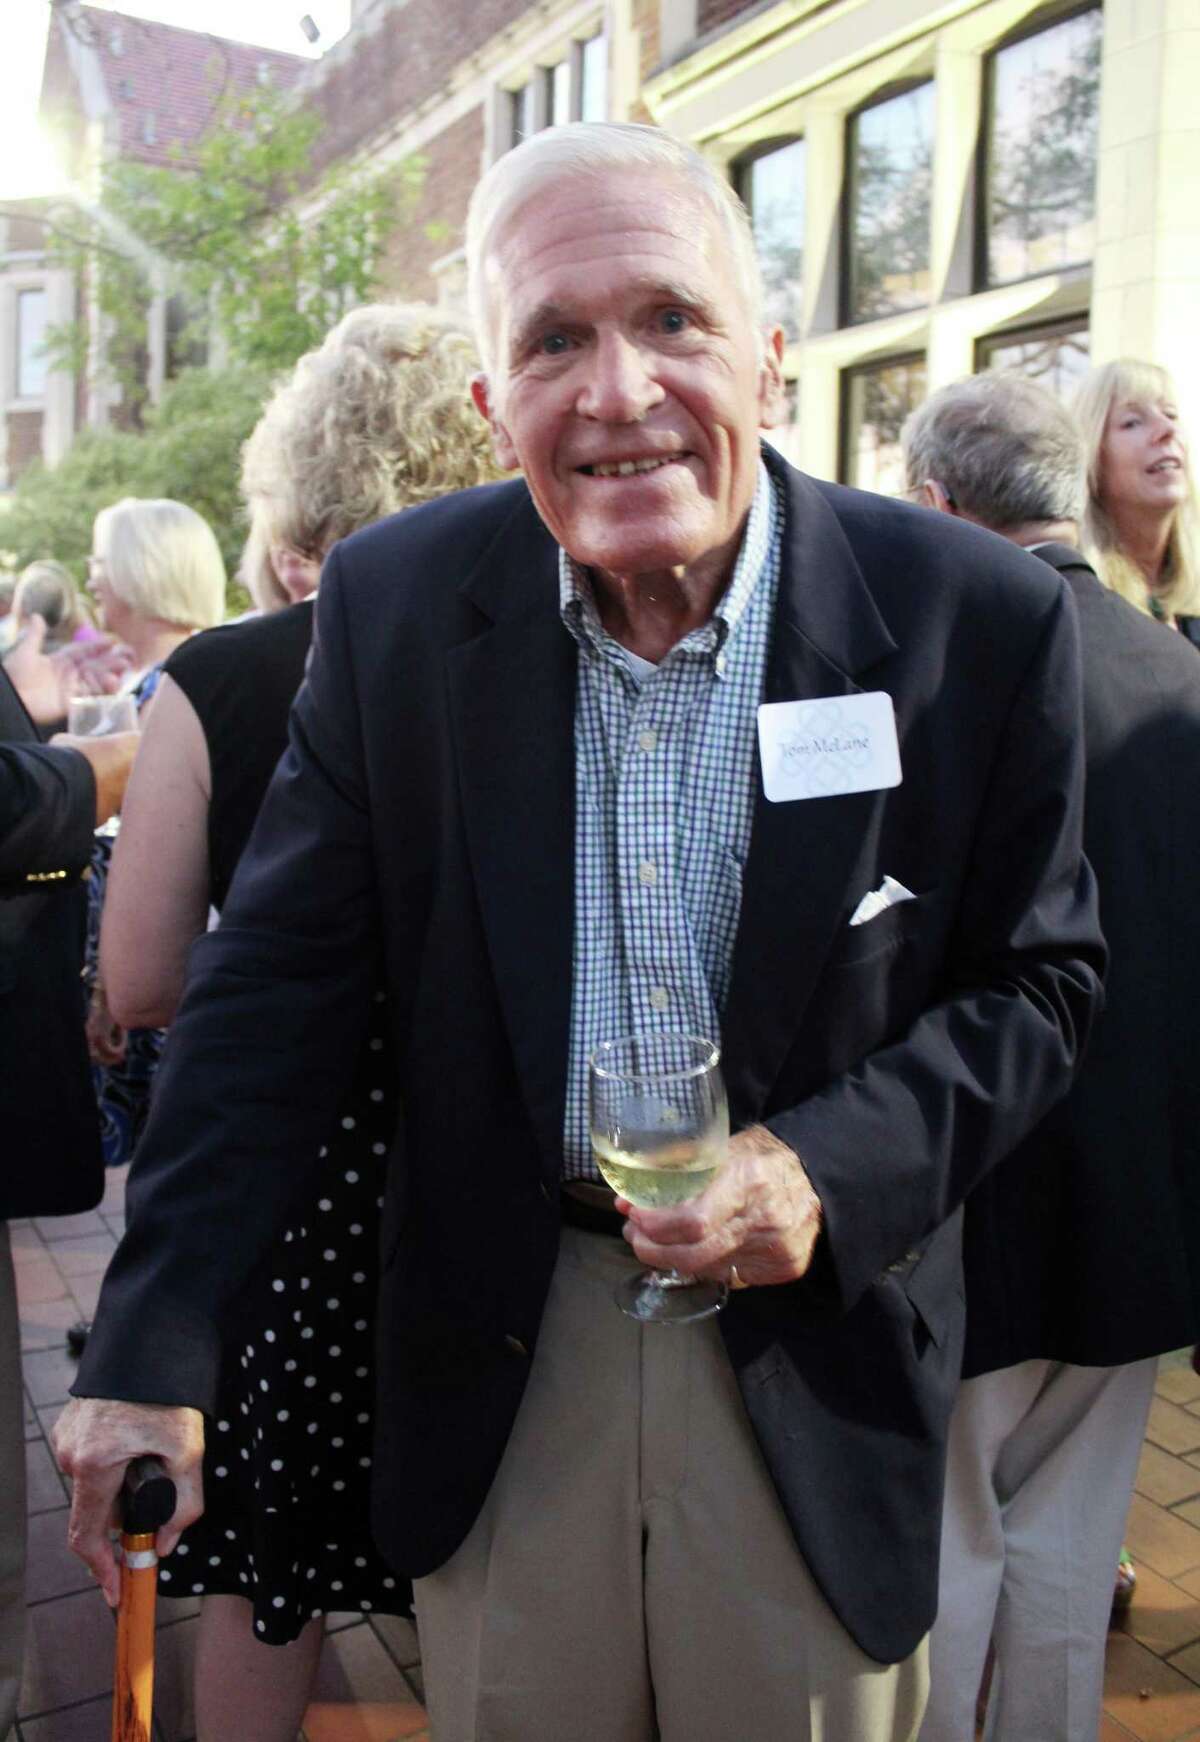 Tom McLane, one of the founding members of the New Canaan Community Foundation, at the Foundation's 40th anniversary celebration in Waveny Park in New Canaan, Conn. on Sept. 26, 2017